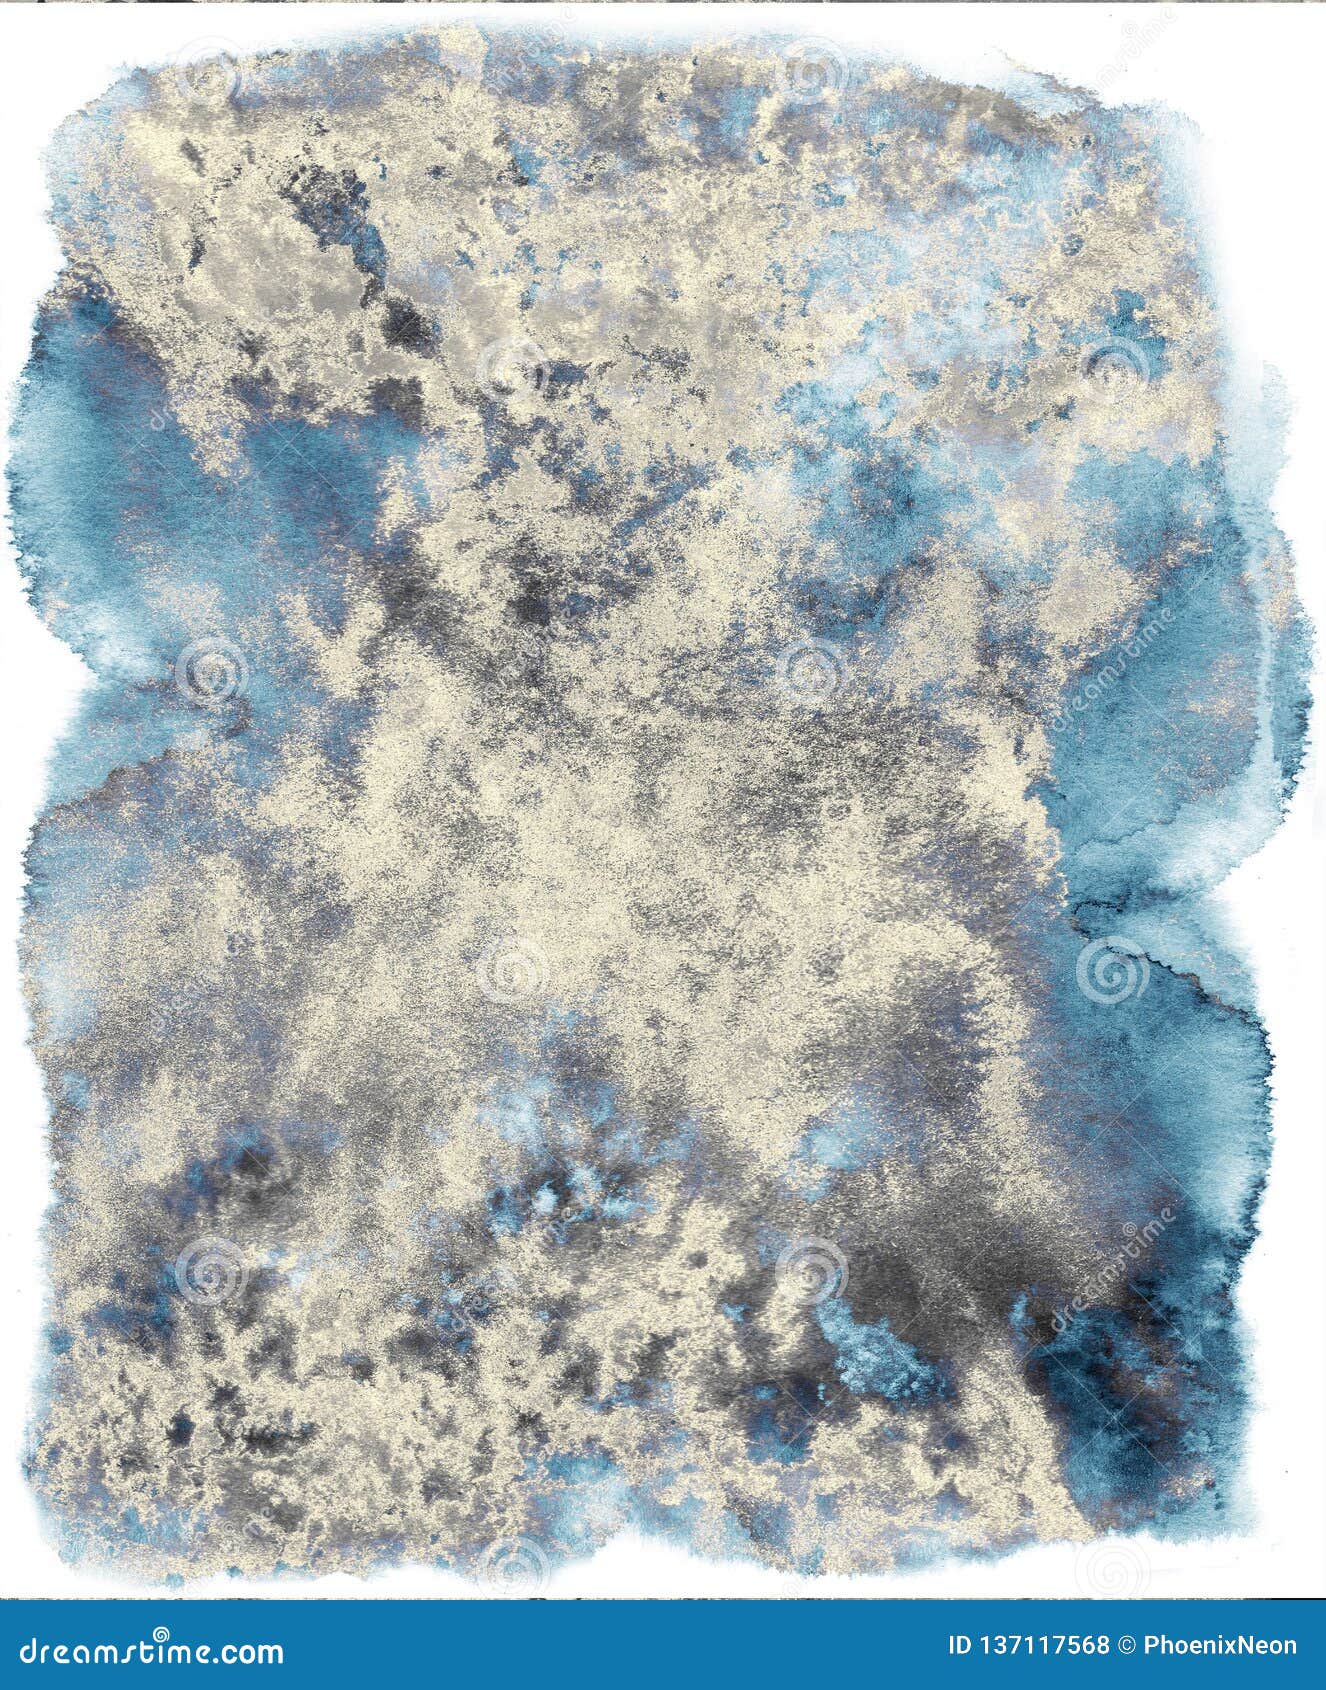 Grunge Watery Effect Abstract Watercolor Or Ink Of Liquid Splatter Of